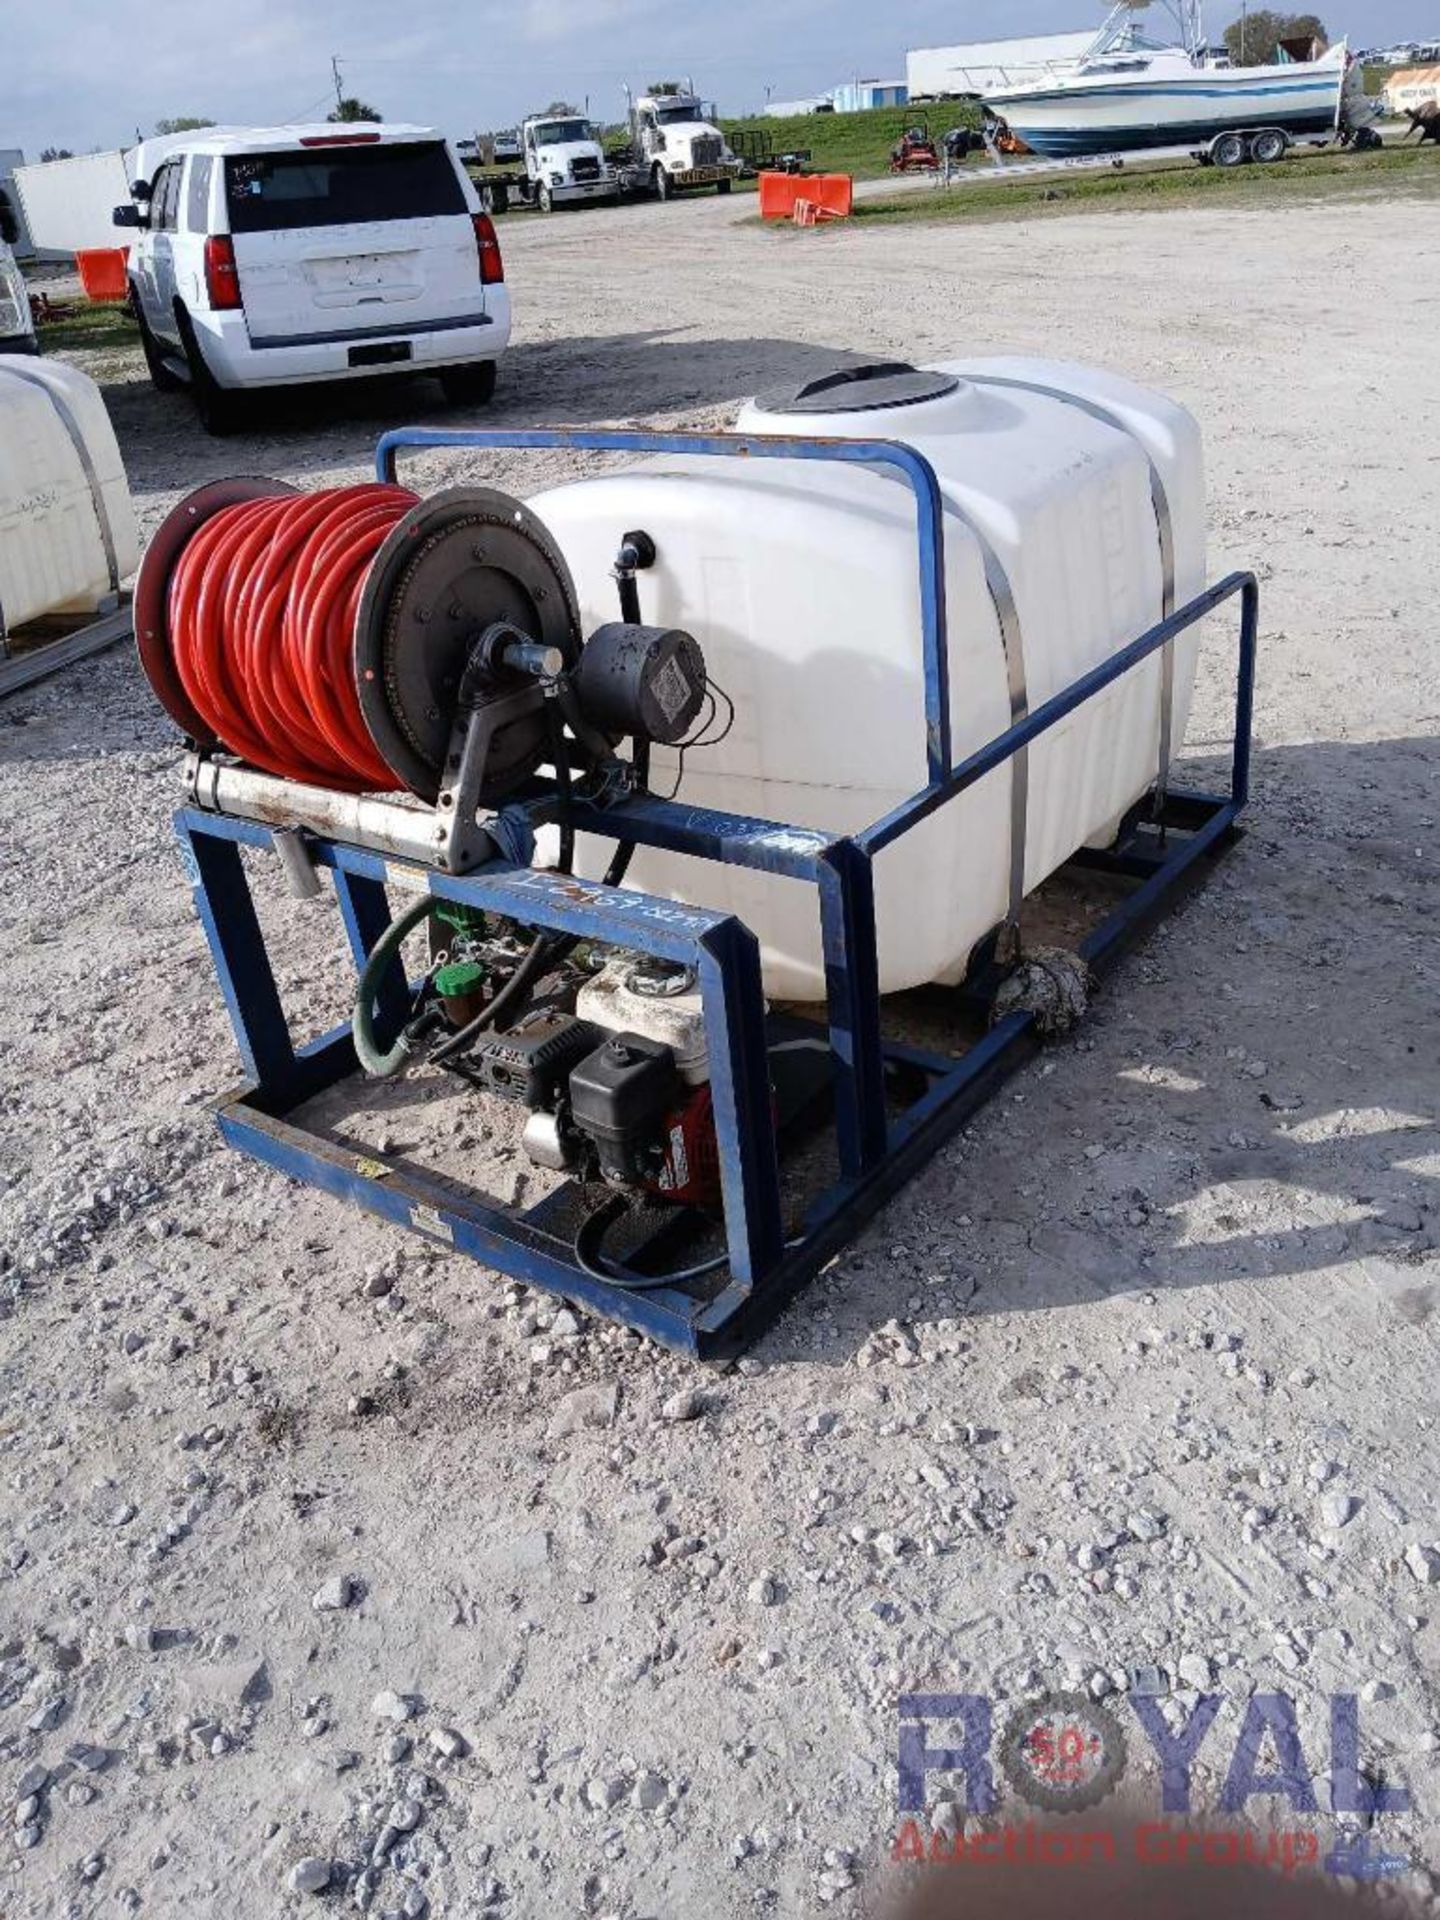 Pressure Washer With Tank